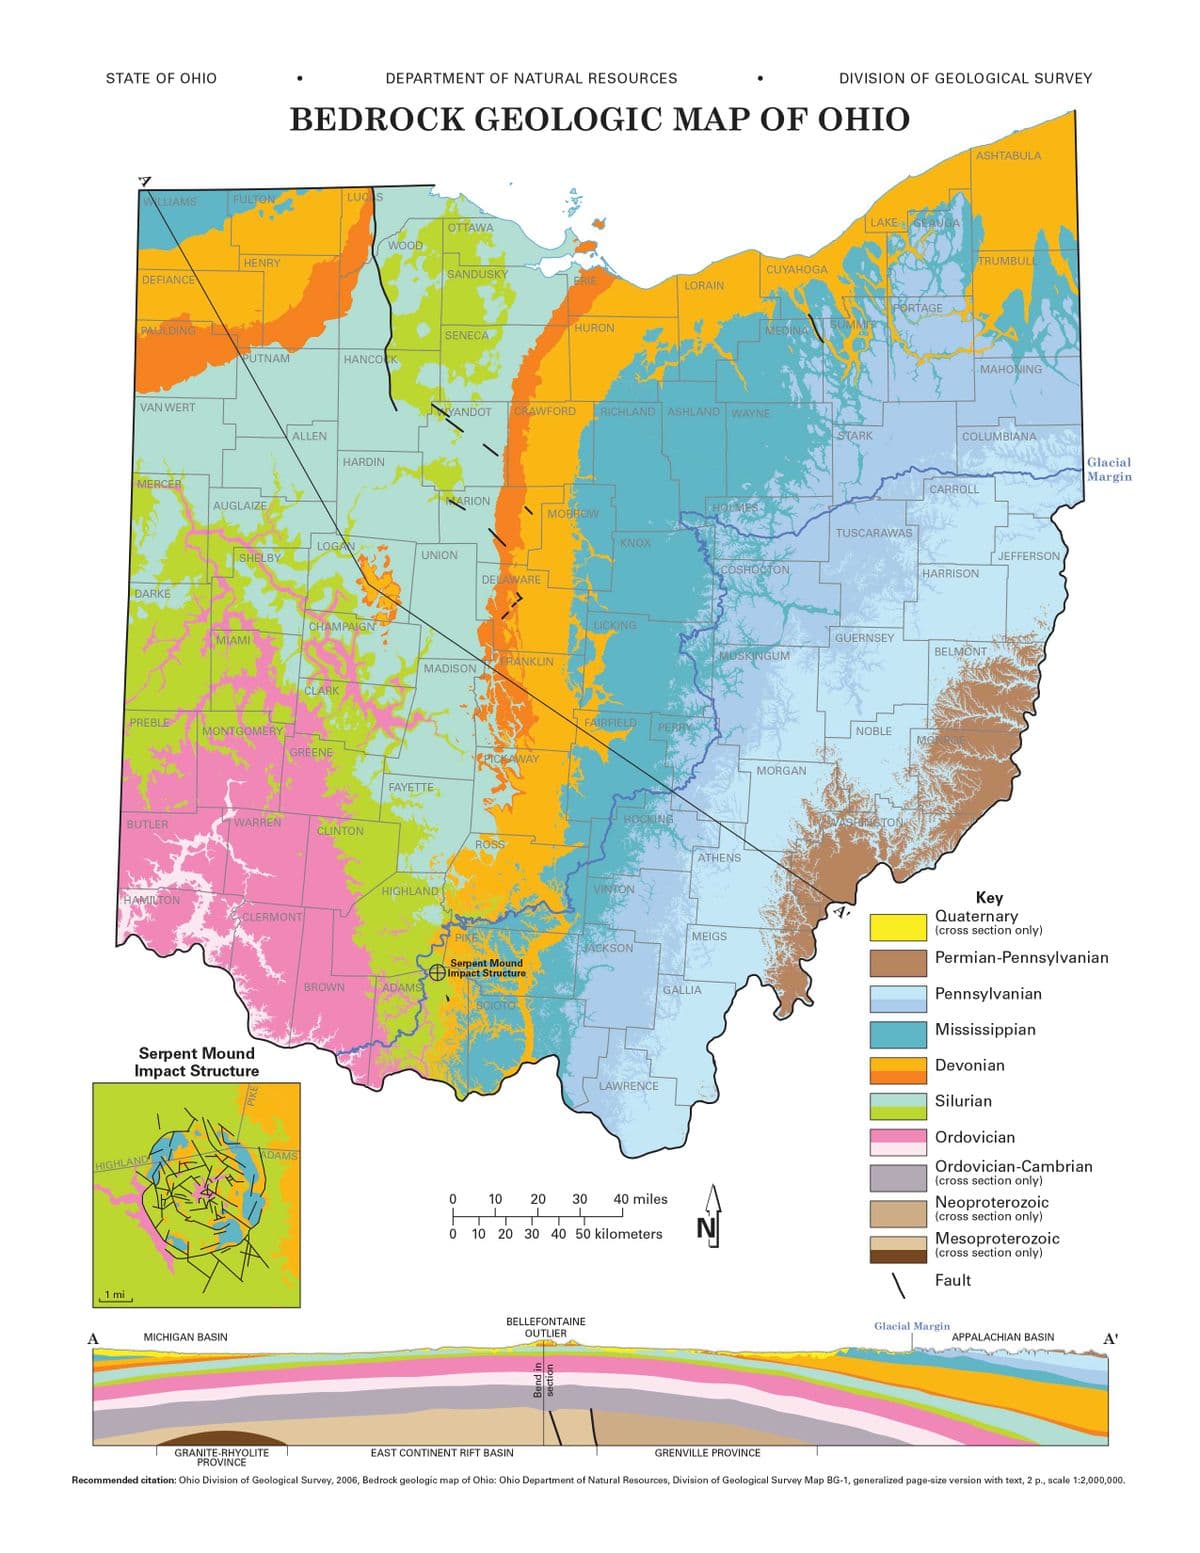 STATE OF OHIO
DEPARTMENT OF NATURAL RESOURCES
DIVISION OF GEOLOGICAL SURVEY
BEDROCK GEOLOGIC MAP OF OHIO
ASHTABULA
WWLLIAMS
FULTON
LUCAS
LAKE GEAUGAT
OTTAWA
WOOD
HENRY
TRUMBULL
CUYAHOGA
SANDUSKY
DEFIANCE
ERIE
LORAIN
PORTAGE
PAULDING
HURON
MEDINA
SUMMIT
SENECA
PUTNAM
HANCOCK
MAHONING
VAN WERT
YANDOT
CRAWFORD
RICHLAND ASHLAND WAYNE
ALLEN
STARK
COLUMBIANA
HARDIN
Glacial
Margin
MERCER
CARROLL
AUGLAIZE
NARION
HOLMES
МОBROW
TUSCARAWAS
LOGAN
KNOX
SHELBY
UNION
JEFFERSON
ACOSHOCTON
HARRISON
DELAWARE
DARKE
CHAMPAIGN
LICKING
MIAMI
GUERNSEY
MUSKINGUM
BELMONT
FRANKLIN
MADISON
CLARK
PREBLE
FAIRFIELD
PERRY
MONTGOMERY
NOBLE
MO
GREENE
PICKAWAY
MORGAN
FAYETTE
WARREN
HOCKING
WASFLINGTON
BUTLER
CLINTON
ROSS
ATHENS
HIGHLAND
VINTON
Key
Quaternary
(cross section only)
HAMILTON
CLERMONT
PIKE
MEIGS
|JACKSON
Permian-Pennsylvanian
Serpent Mound
Impact Structure
BROWN
ADAMS
GALLIA
Pennsylvanian
SCIOTO
Mississippian
Serpent Mound
Impact Structure
Devonian
LAWRENCE
Silurian
Ordovician
ADAMS
Ordovician-Cambrian
(cross section only)
HIGHLAND
10
20
30
40 miles
Neoproterozoic
(cross section only)
10 20 30 40 50 kilometers
Mesoproterozoic
(cross section only)
Fault
1 mi
BELLEFONTAINE
Glacial Margin
А
MICHIGAN BASIN
OUTLIER
APPALACHIAN BASIN
A'
GRANITE-RHYOLITE
PROVINCE
EAST CONTINENT RIFT BASIN
GRENVILLE PROVINCE
Recommended citation: Ohio Division of Geological Survey, 2006, Bedrock geologic map of Ohio: Ohio Department of Natural Resources, Division of Geological Survey Map BG-1, generalized page-size version with text, 2 p., scale 1:2,000,000.
PIKE
Bend in
section
